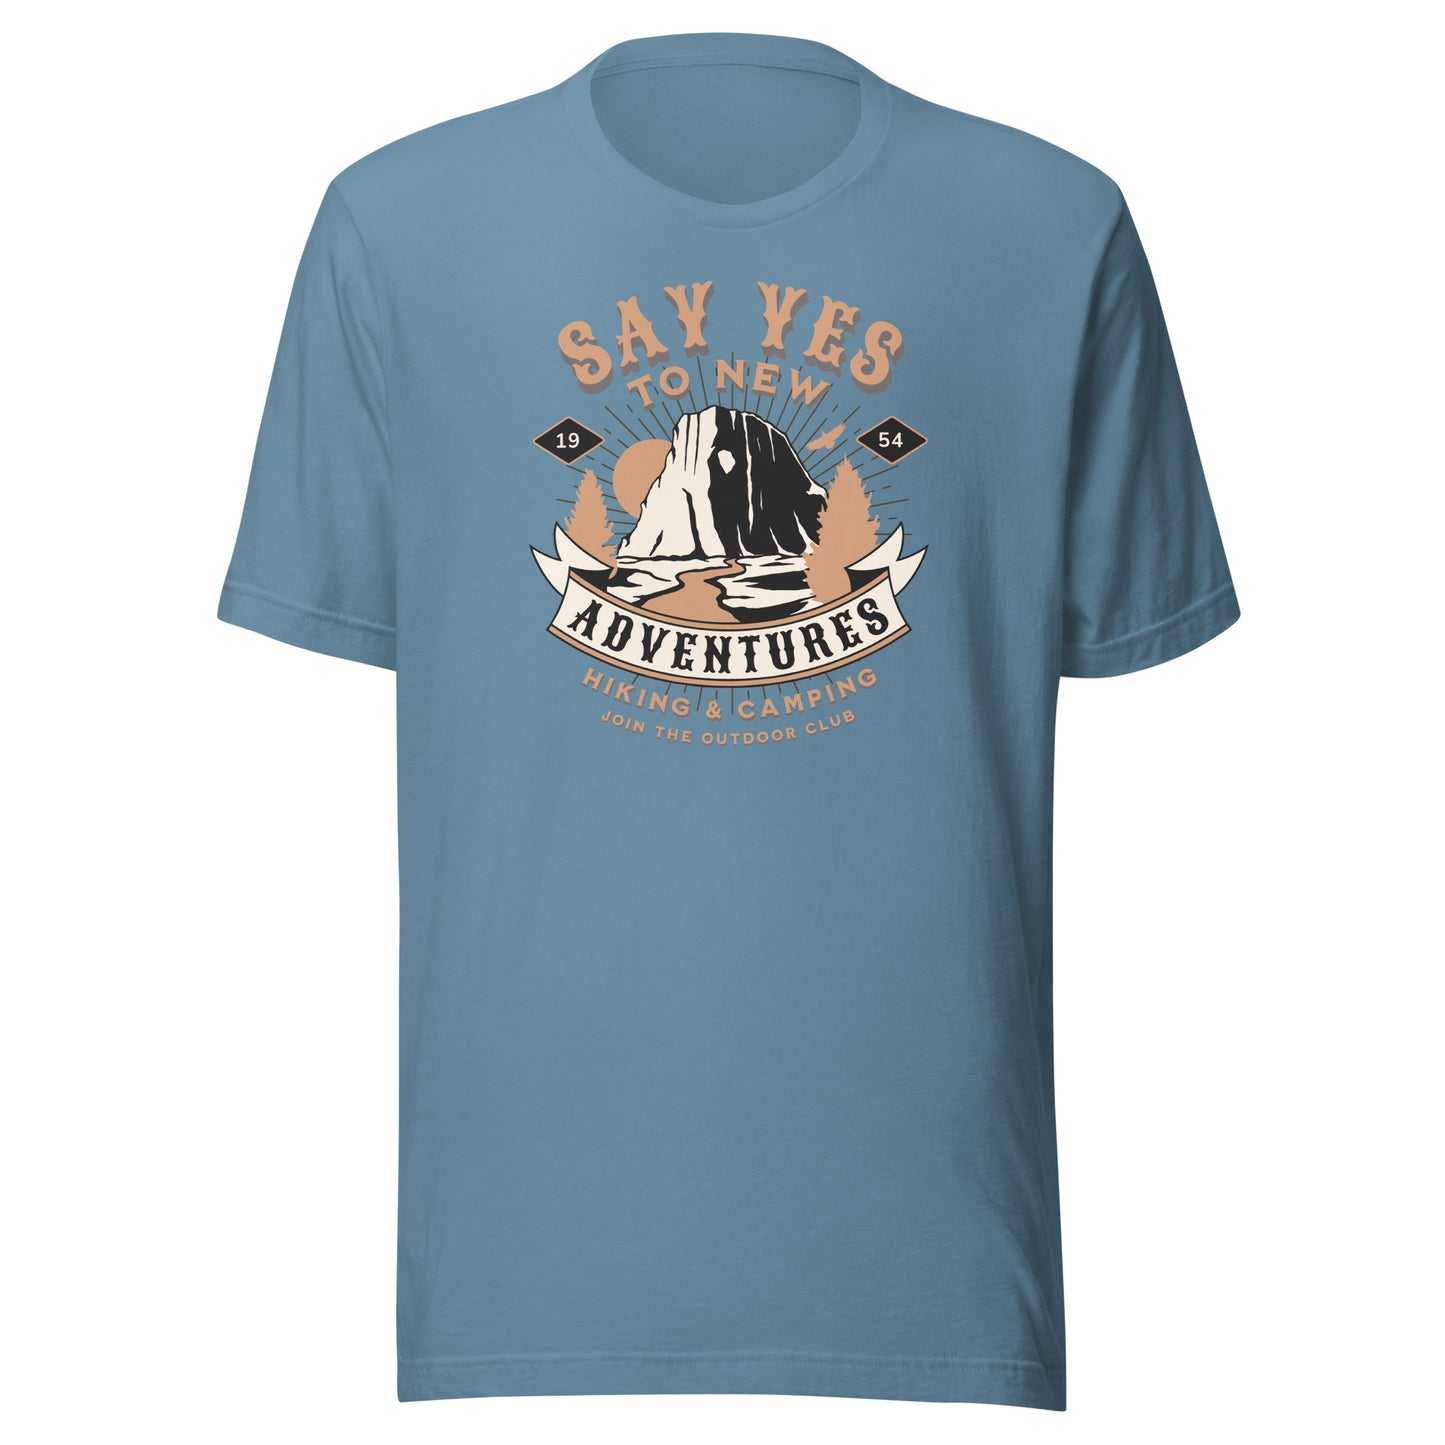 Say Yes to New Adventures Unisex t-shirt